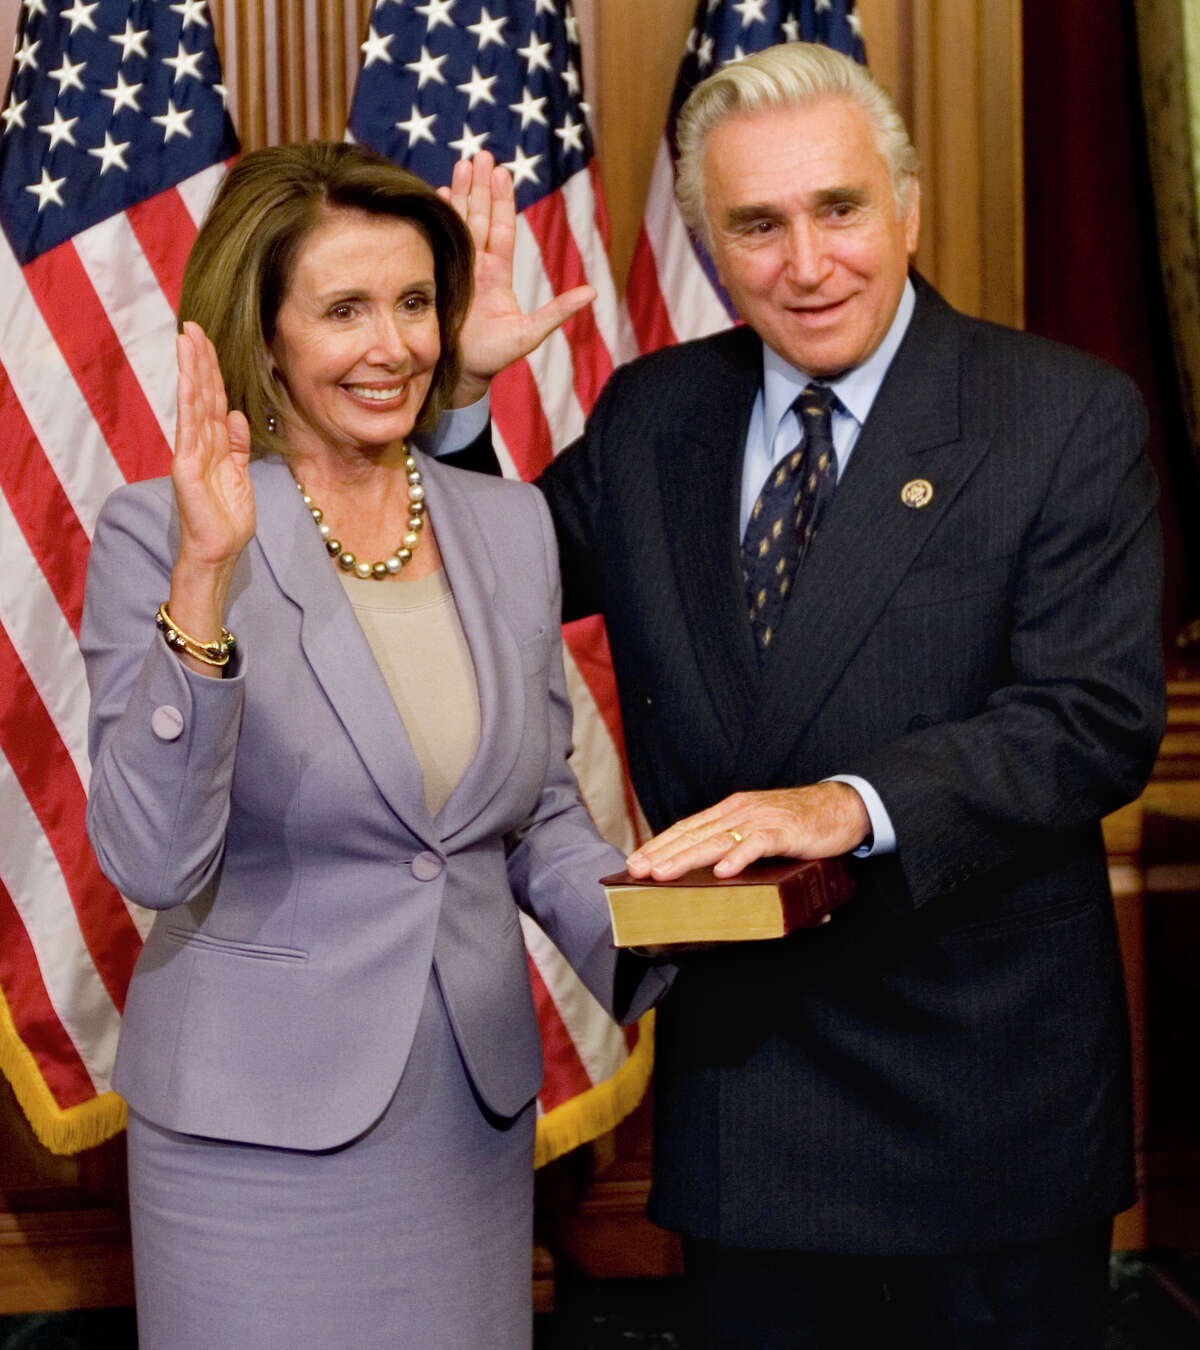 In this Jan. 6, 2009 file photo, House Speaker Nancy Pelosi, D-Calif., left, stands with Rep. Maurice Hinchey, D-N.Y., on Capitol Hill in Washington. (AP Photo/Haraz N. Ghanbari, File)